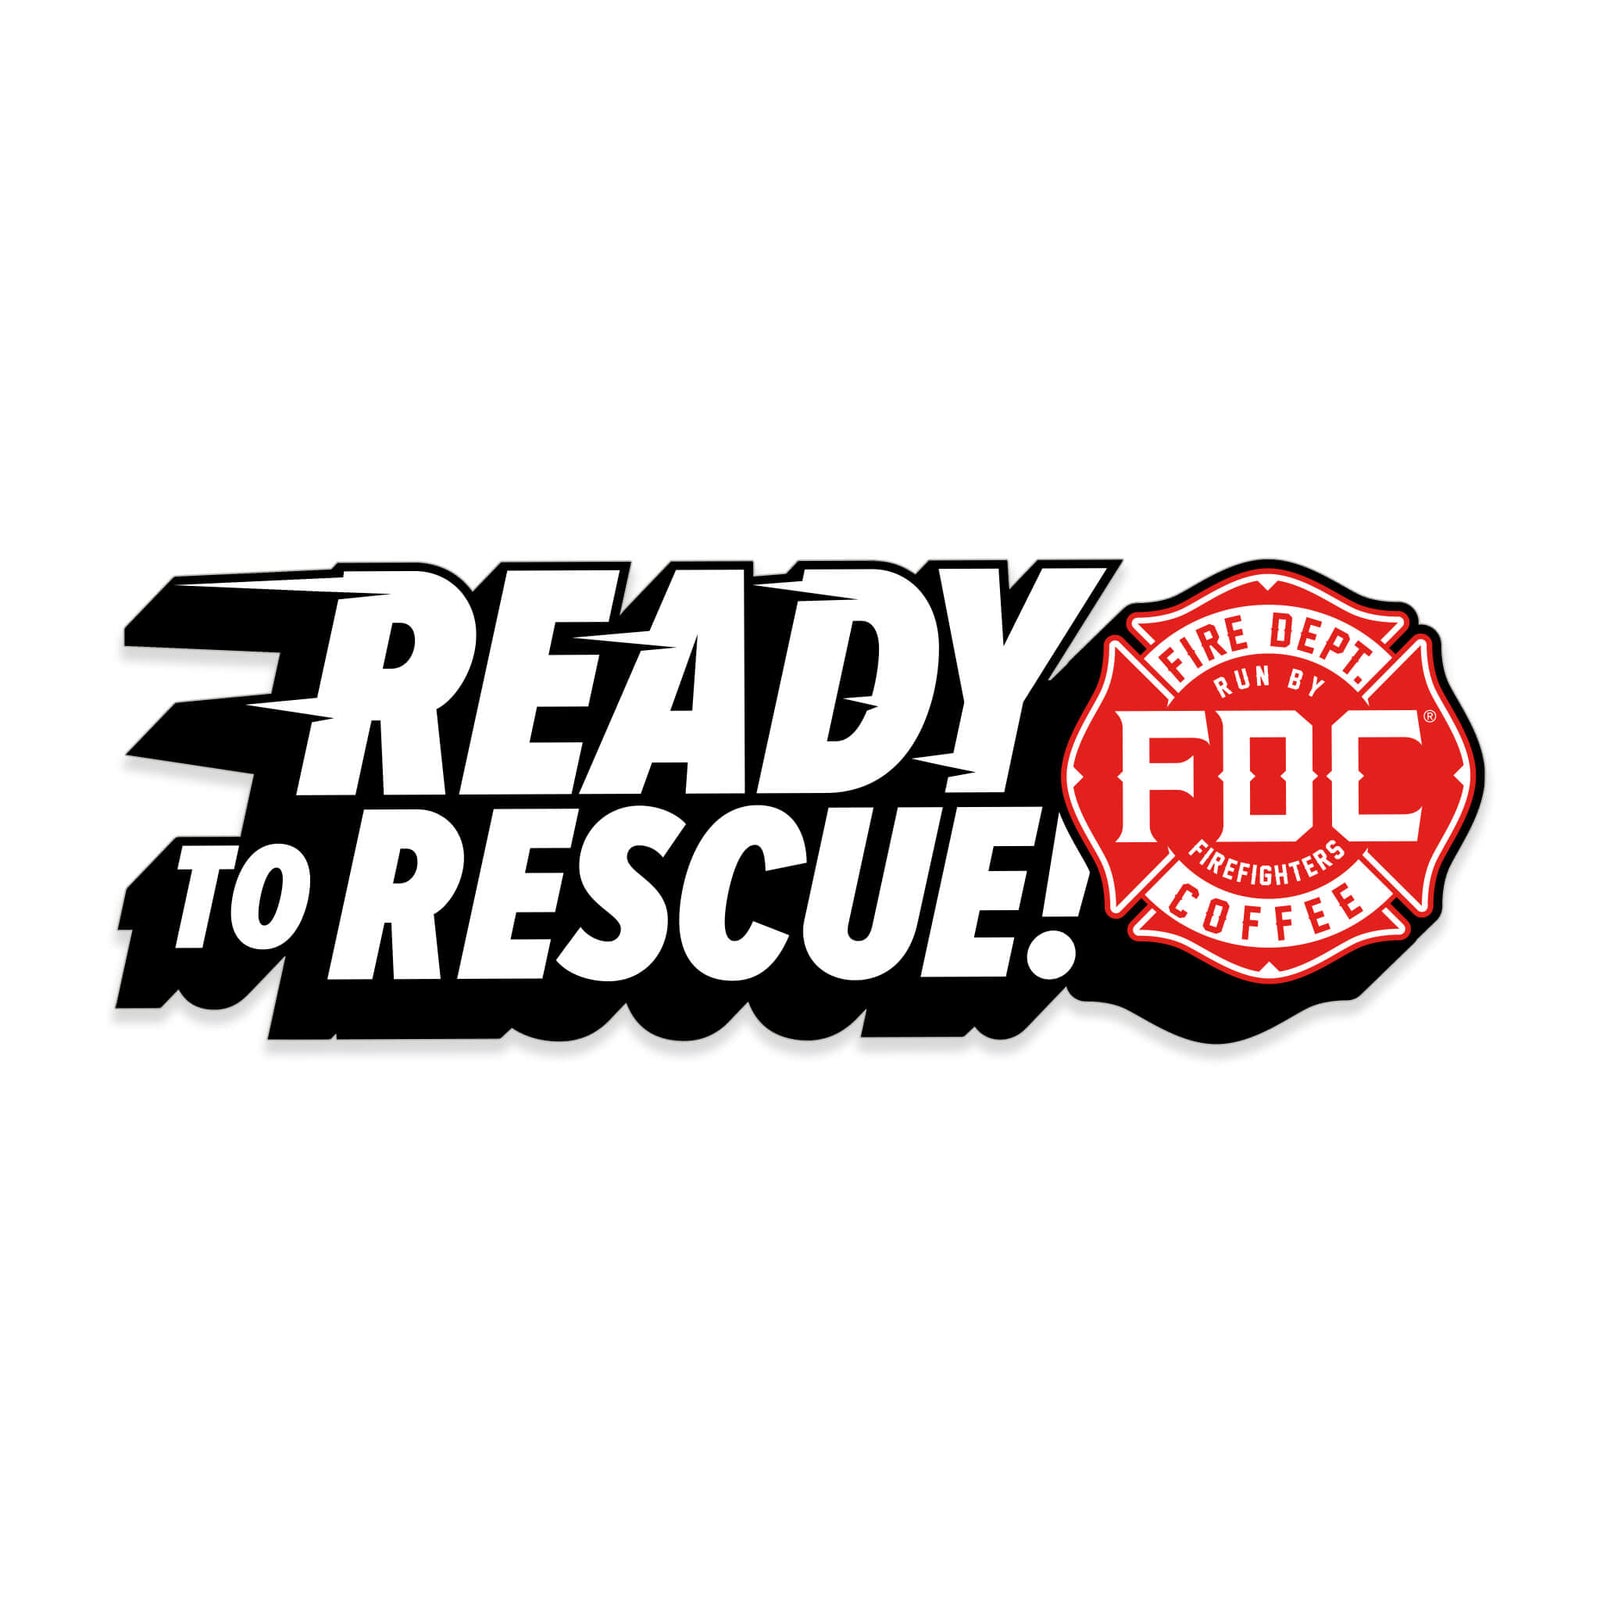 A sticker with the FDC logo and text that says "Ready to Rescue"